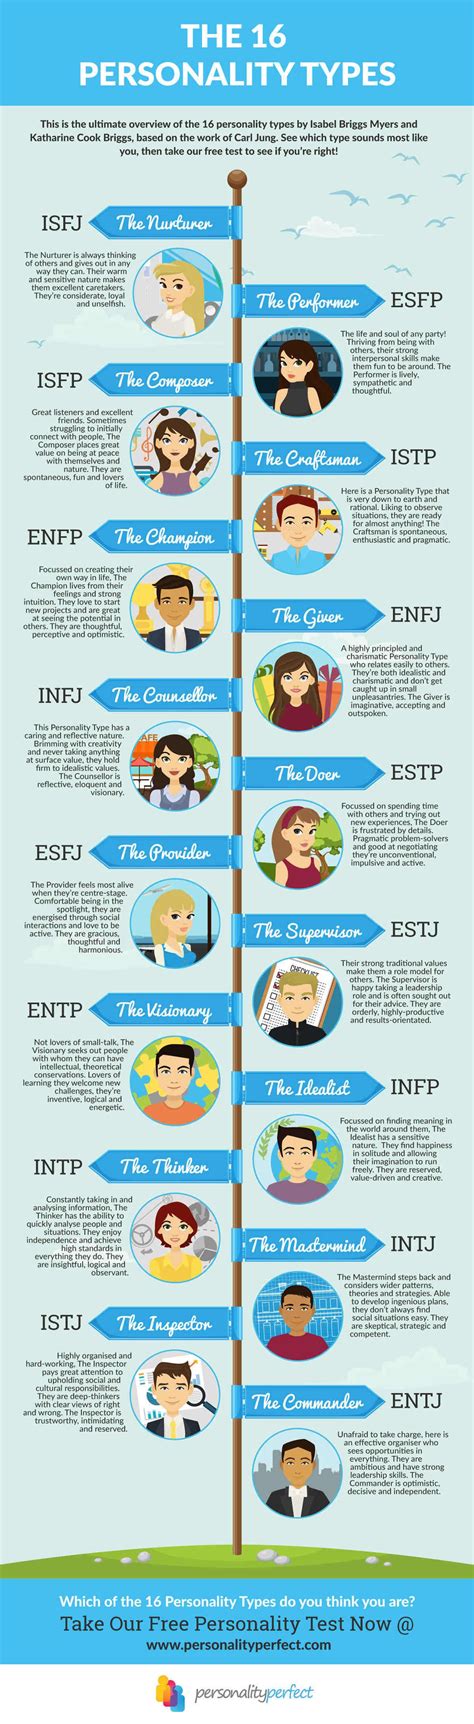 Myers Briggs 16 Personality Types Overview What S Your Type Find Out